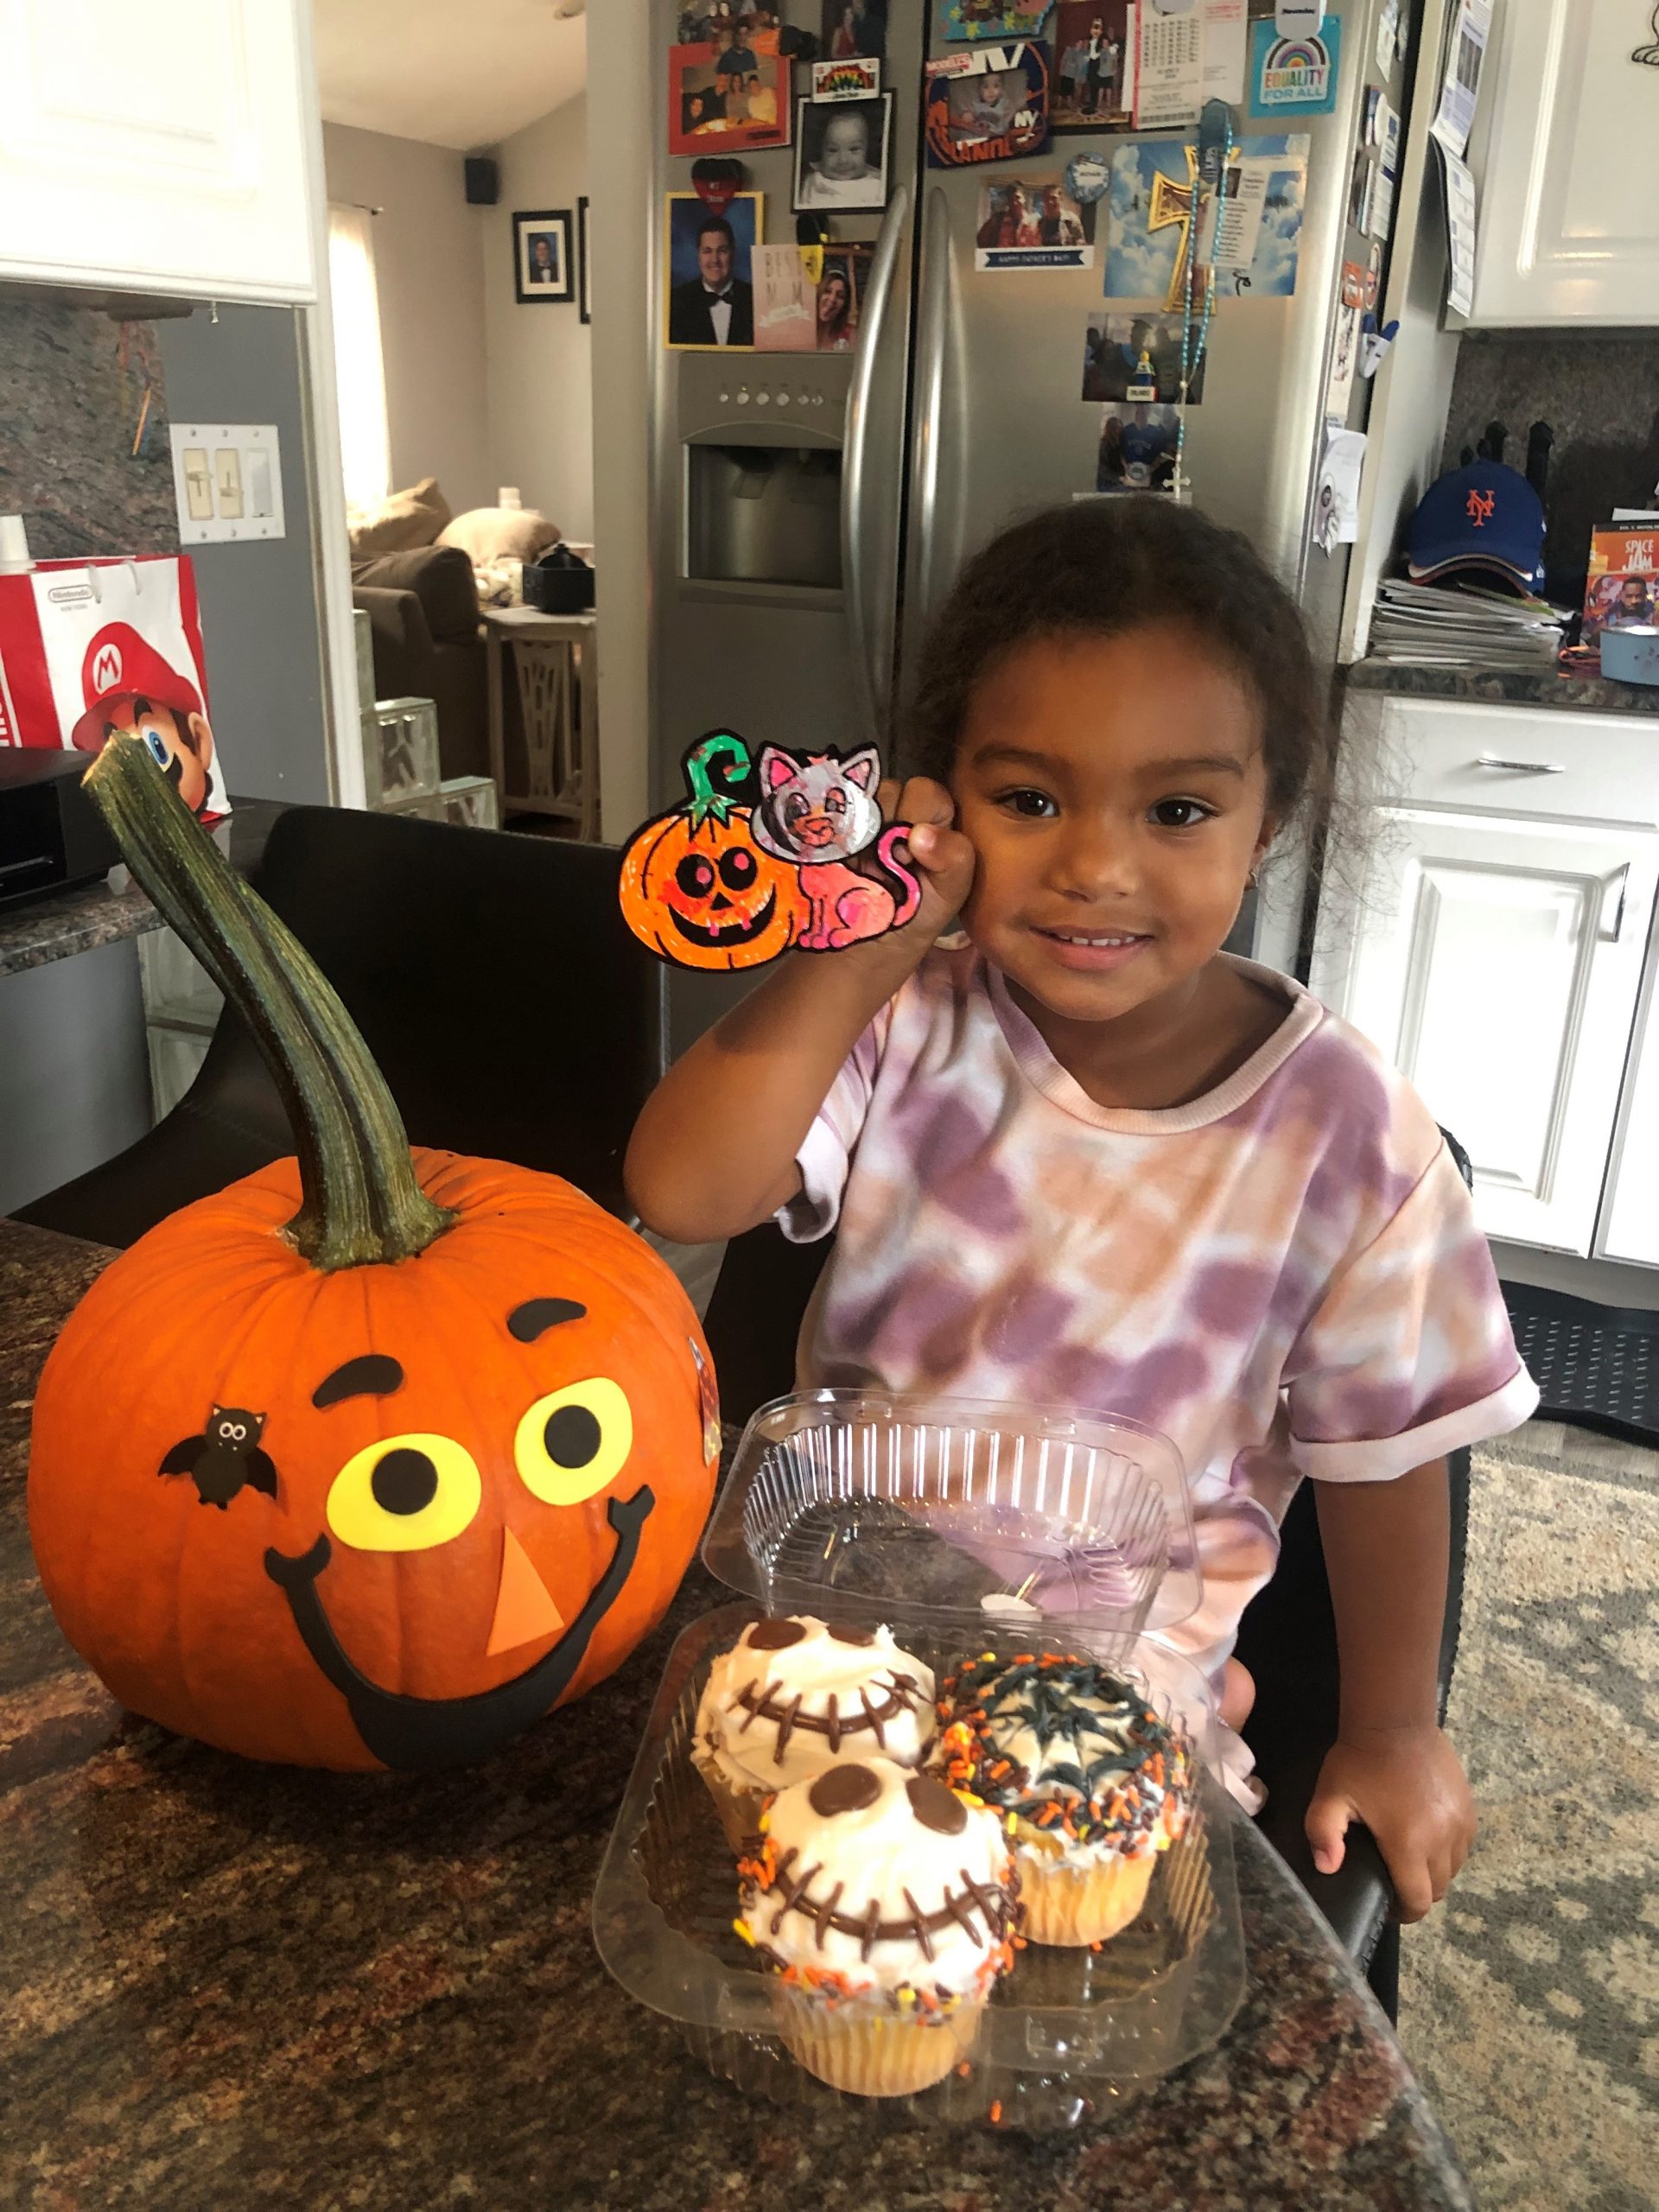 a child holding a diy craft and a decorated pumpkin and cupcakes on a table